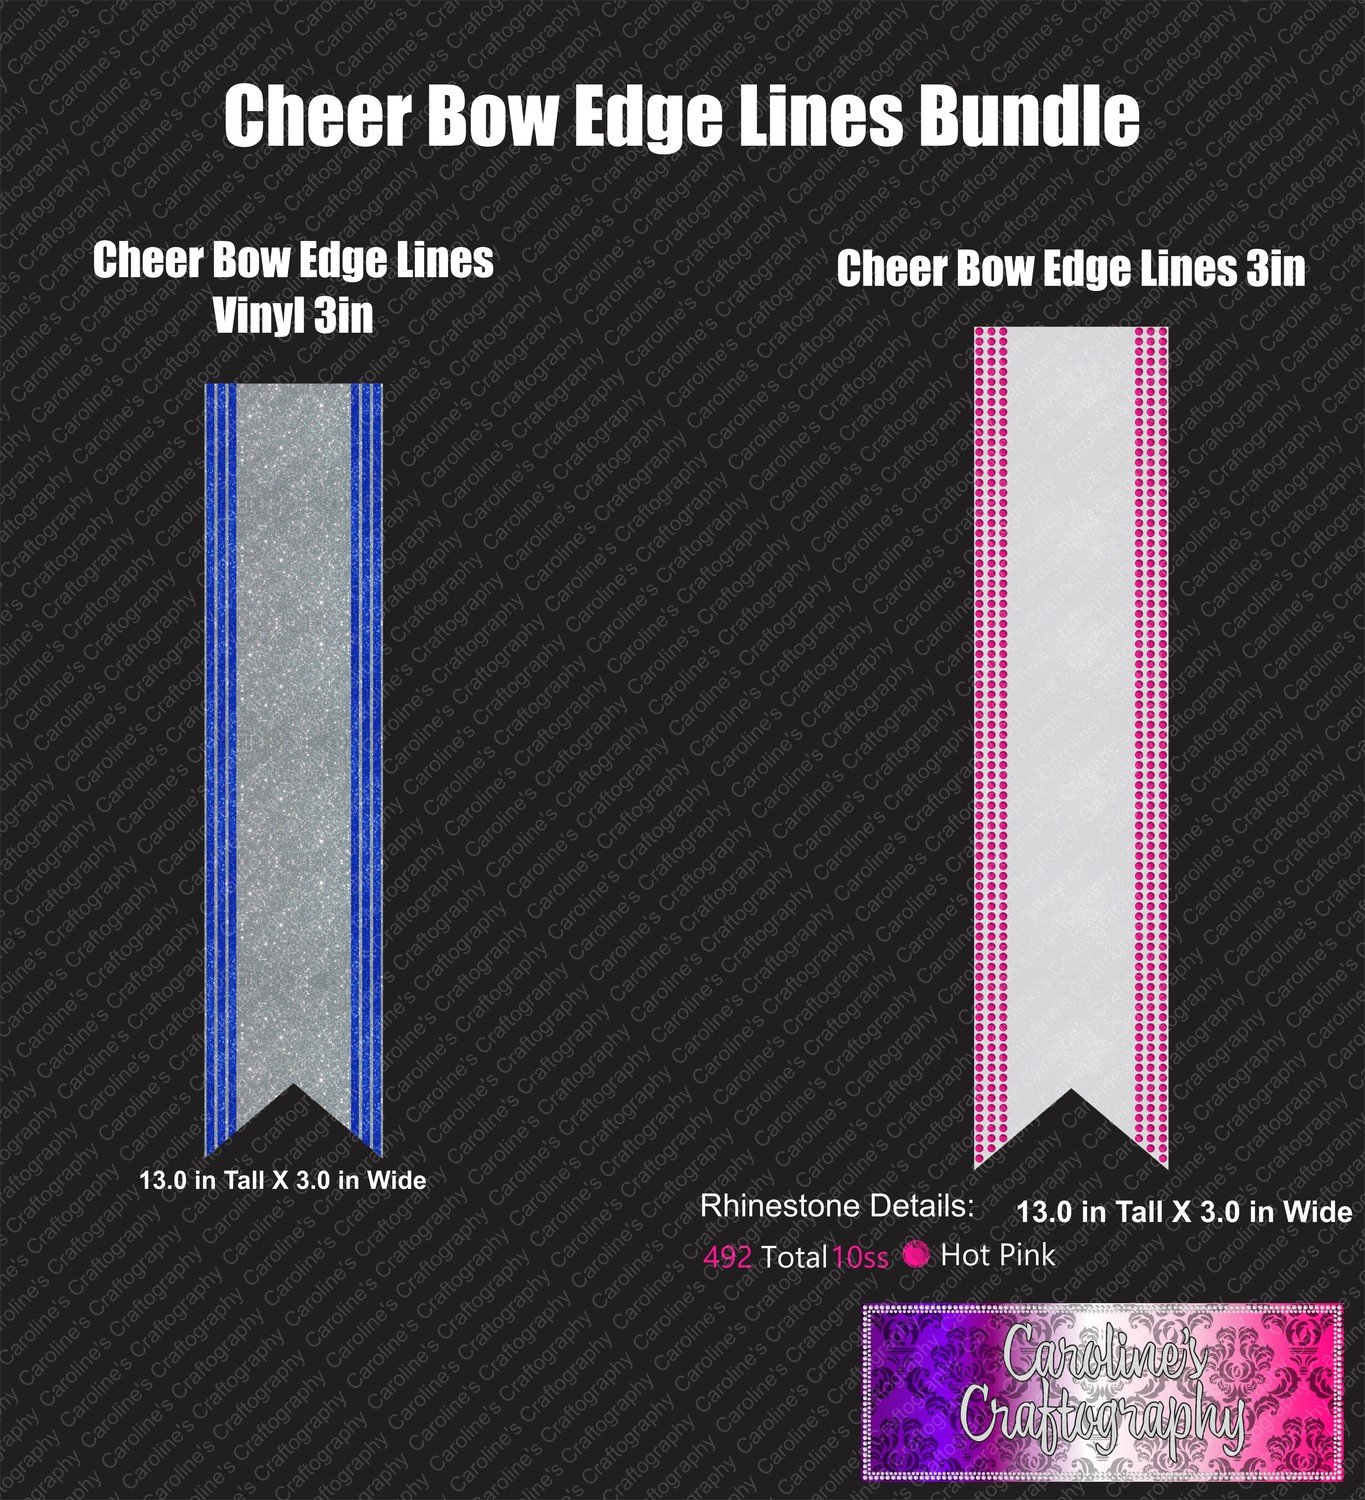 Edge Lines Cheer Bow 3in Stone